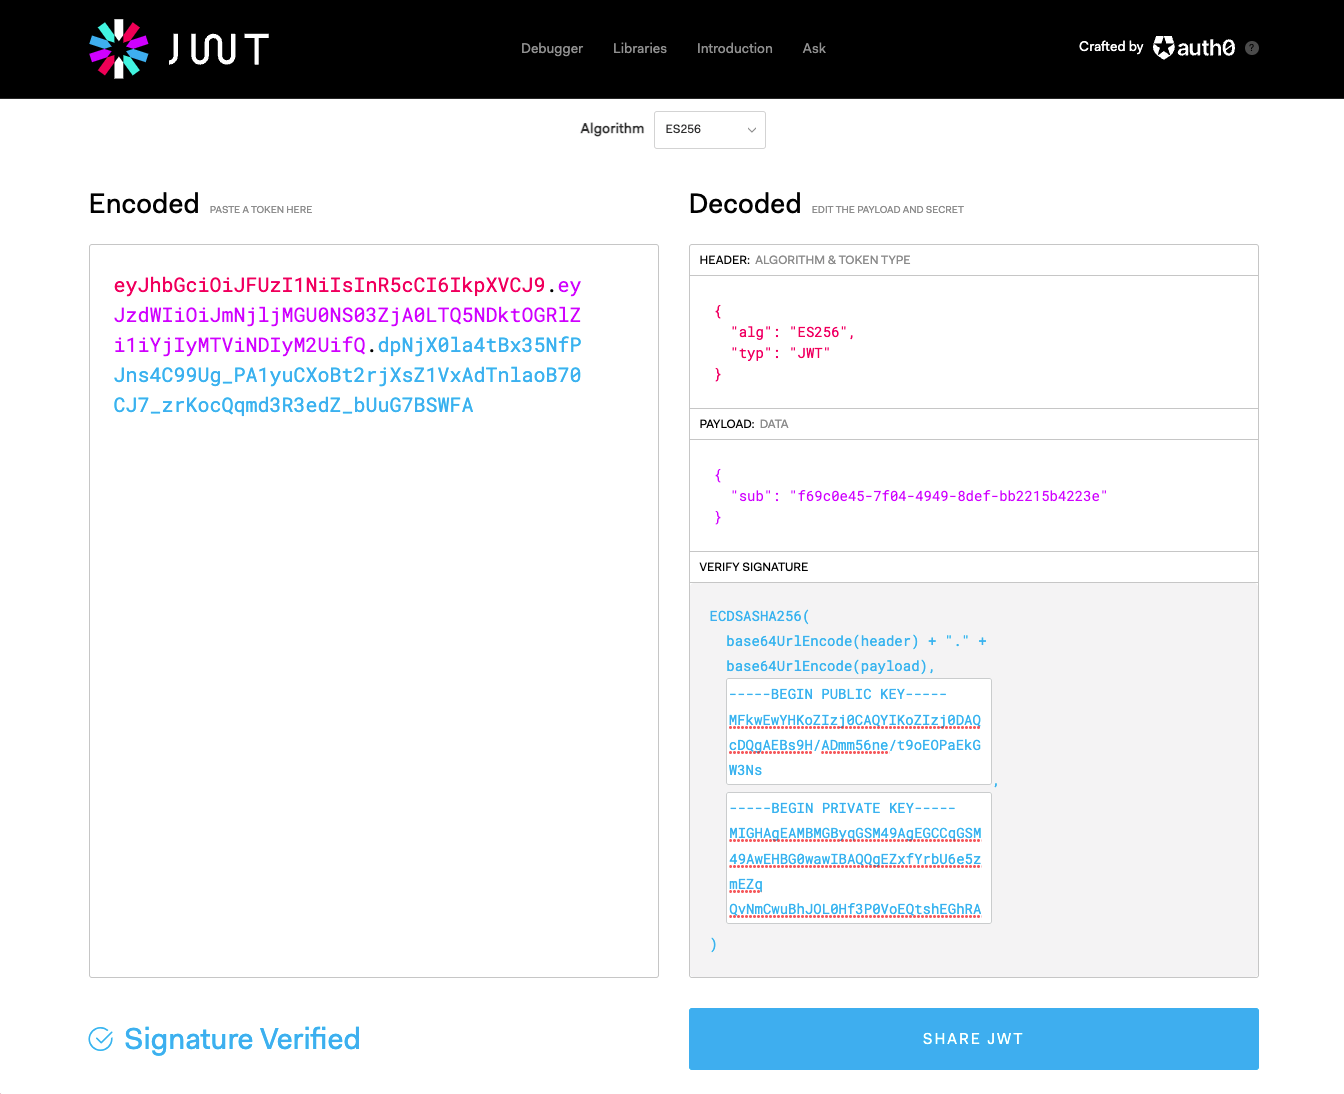 Verifying the signature in jwt.io